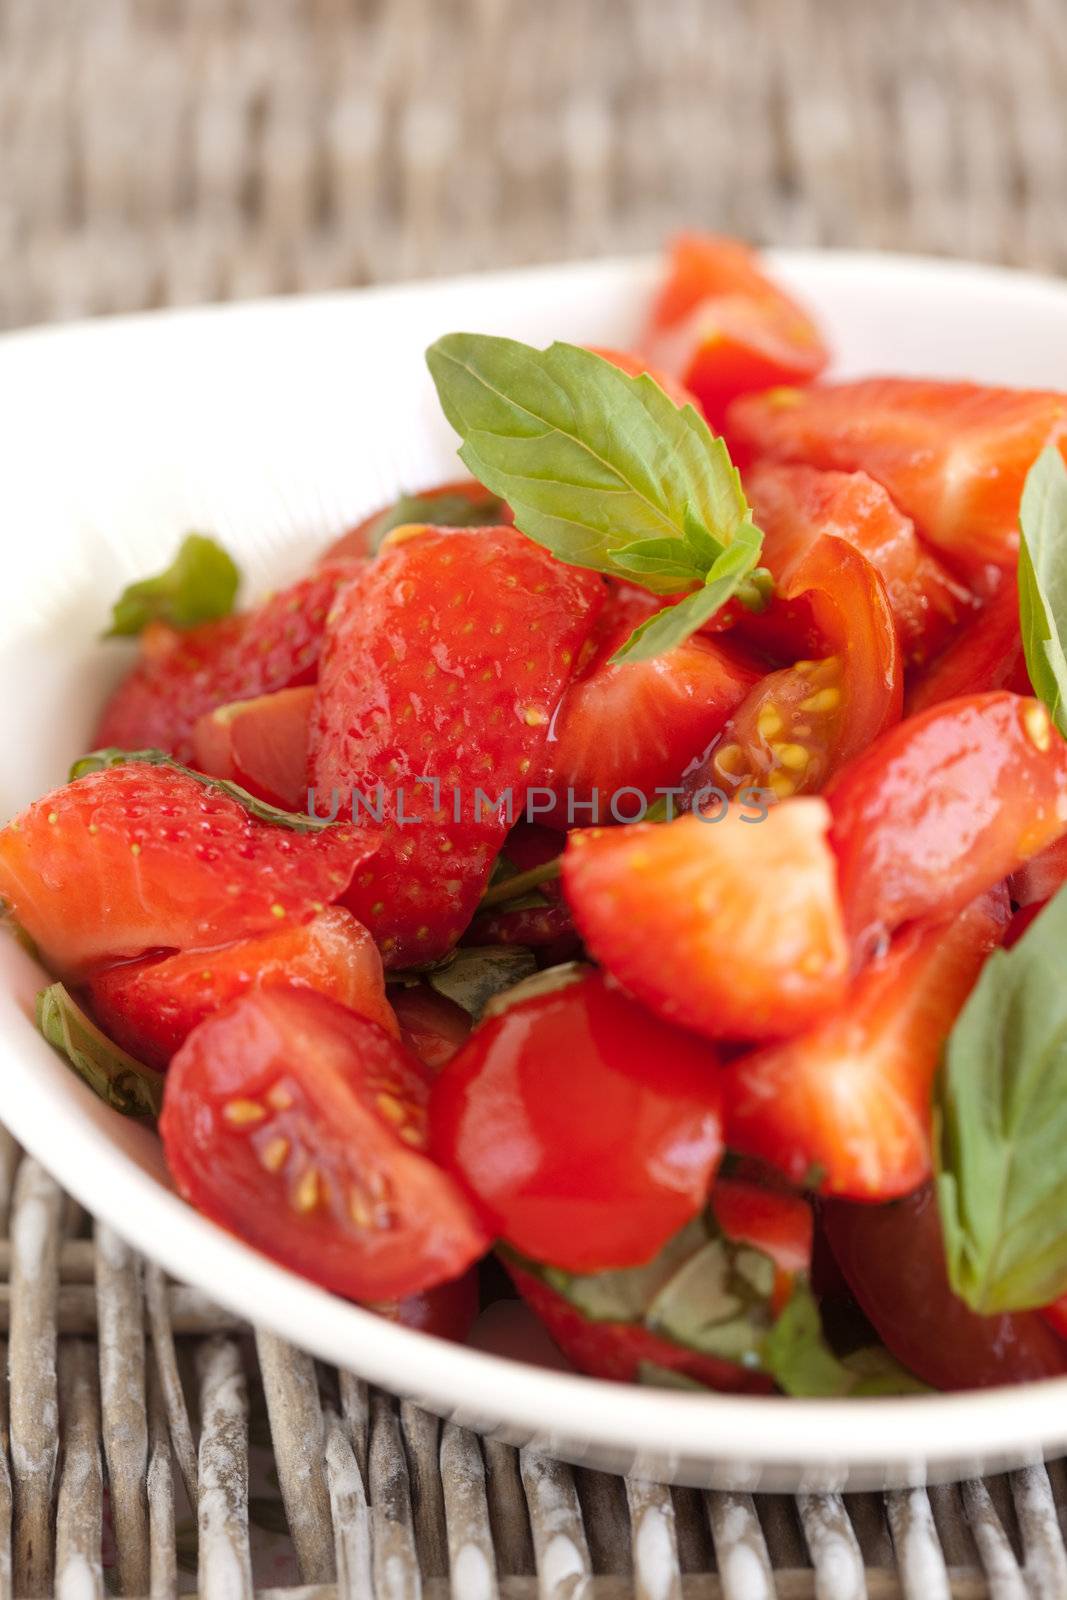 Delicious salad with strawberries and tomatoes